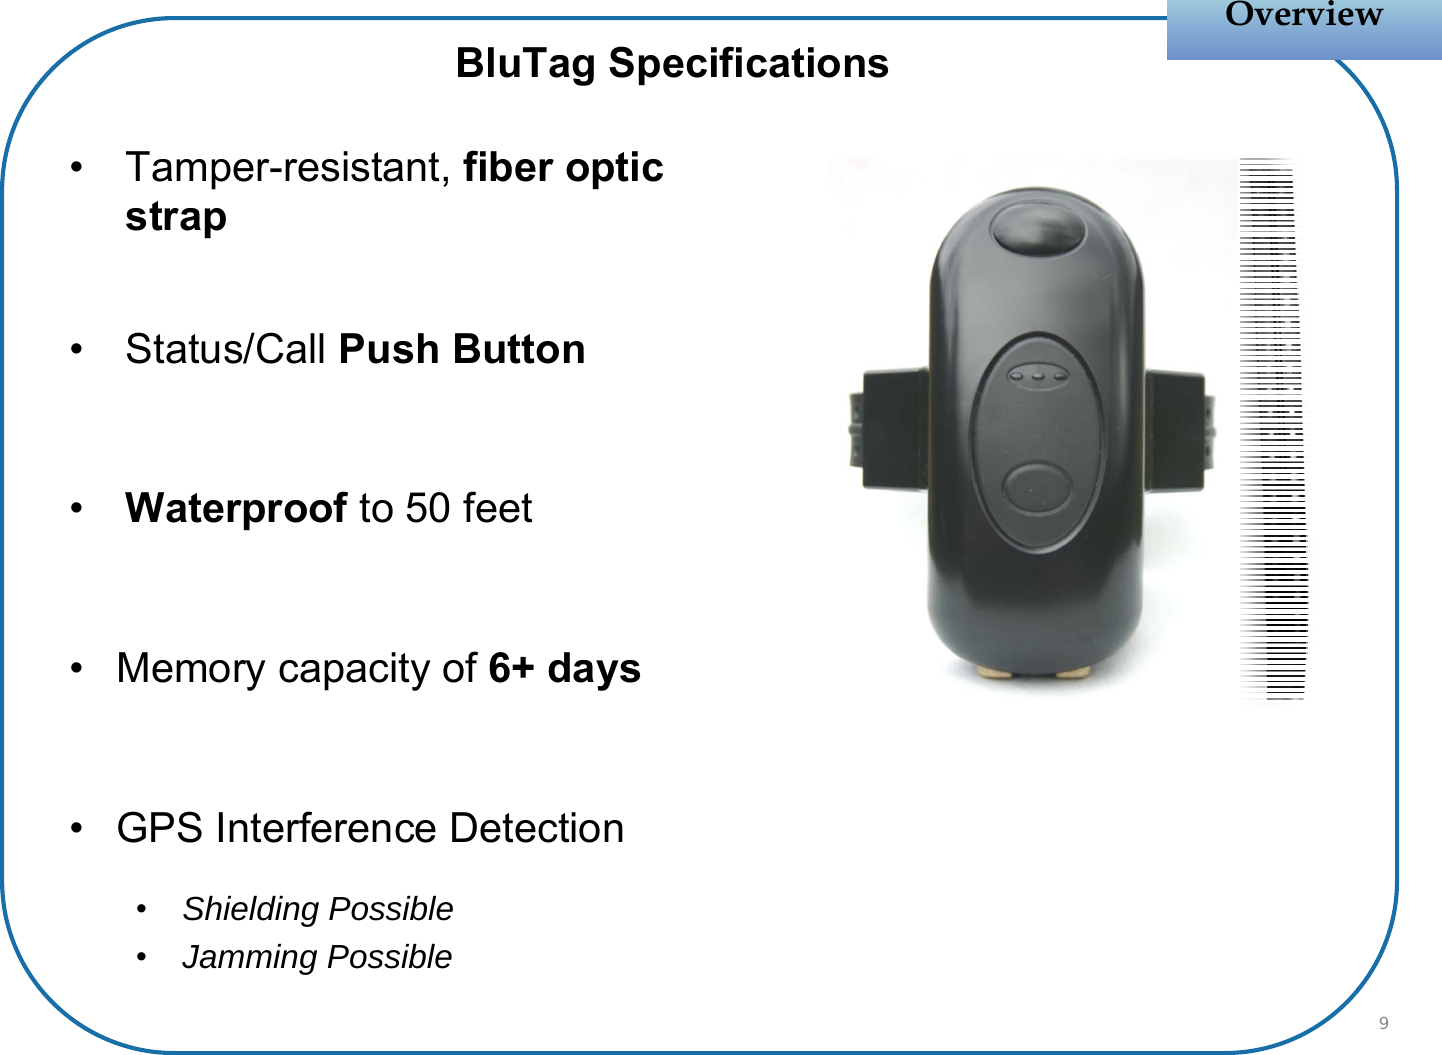 • Tamper-resistant, fiber optic strap• Status/Call Push Button•Waterproof to 50 feet• Memory capacity of 6+ days• GPS Interference Detection•Shielding Possible•Jamming PossibleOverviewOverviewBluTag Specifications9